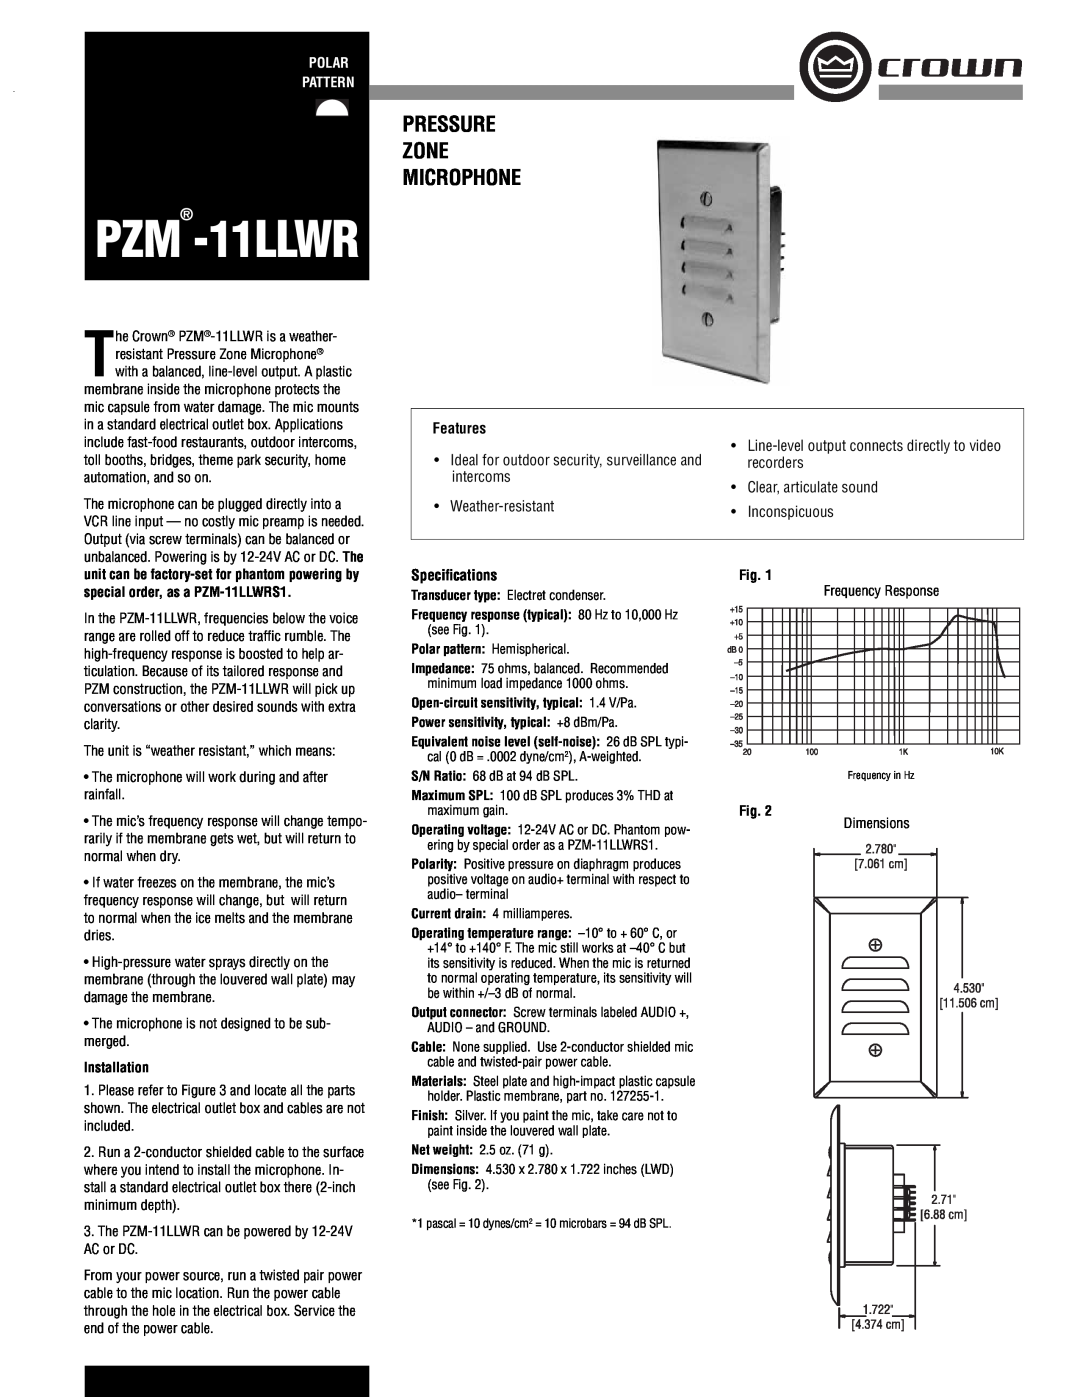 Crown Audio PZM-11LLWR specifications PZM -11LLWR, Pressure Zone Microphone, Polar Pattern, Installation, Features 